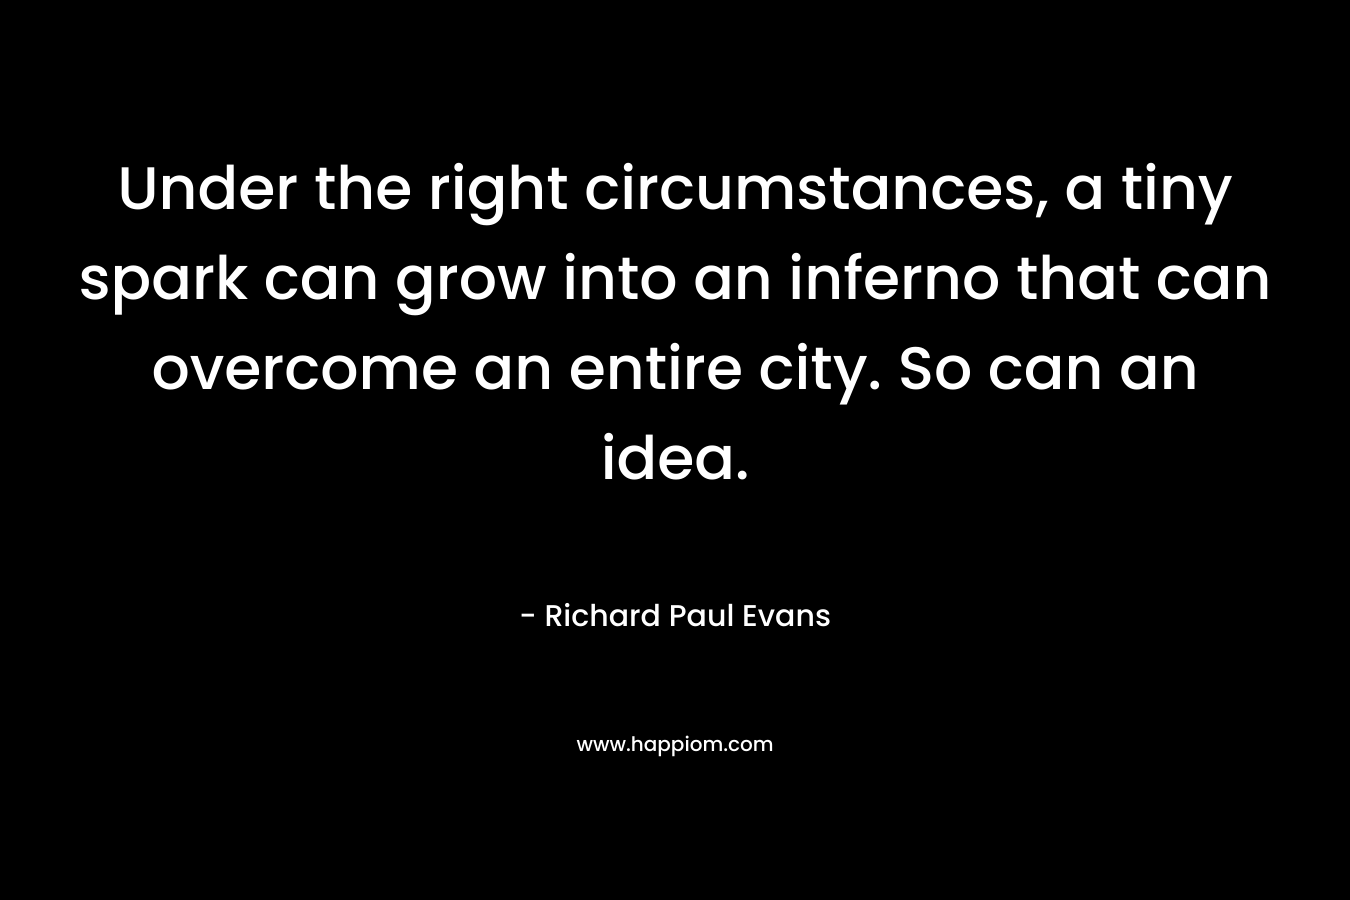 Under the right circumstances, a tiny spark can grow into an inferno that can overcome an entire city. So can an idea. – Richard Paul Evans